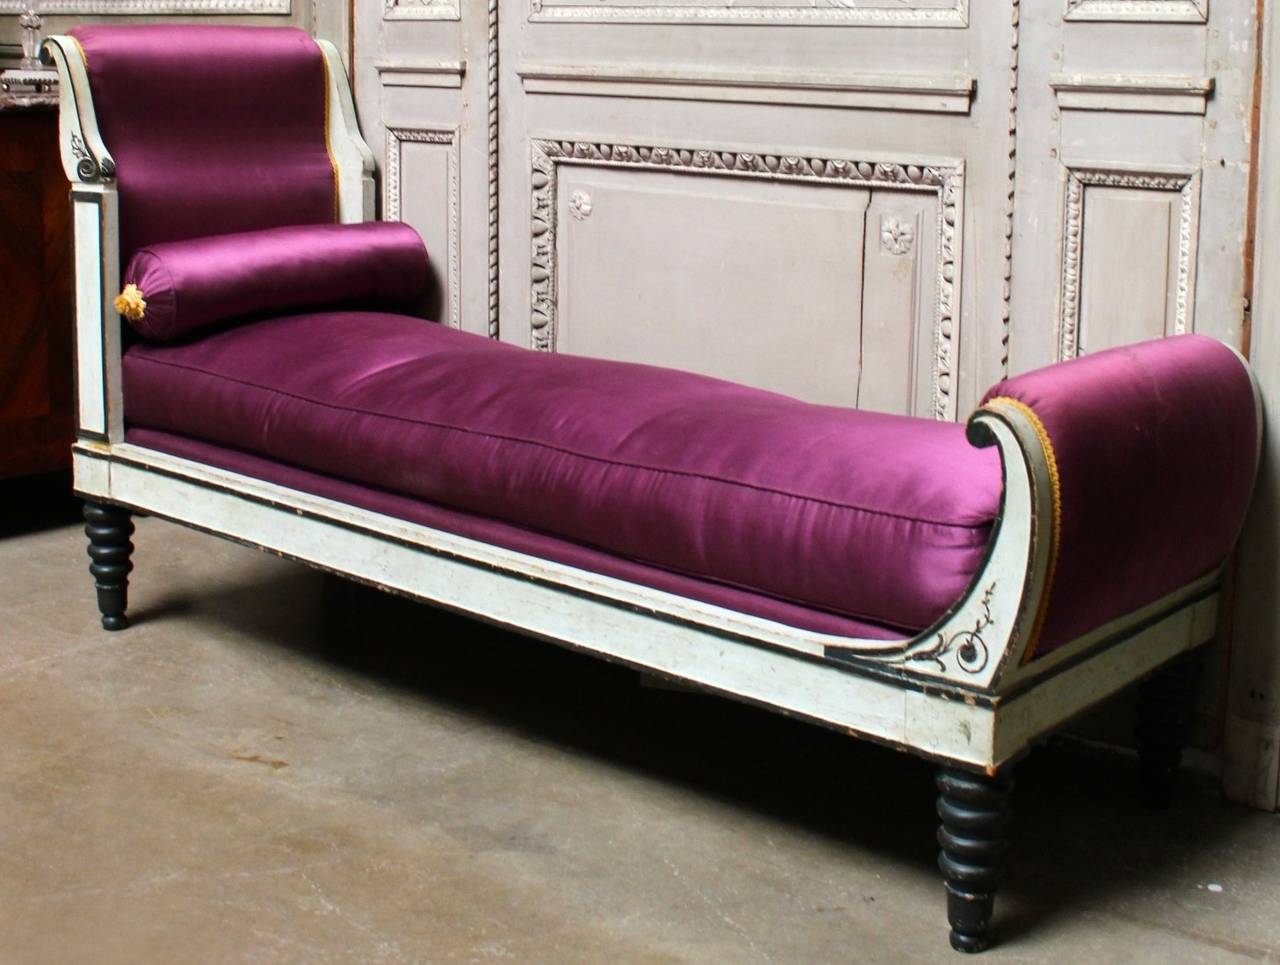 French Directoire period Recamier, chaise lounge in a black and white painted finish from the late 18th century. This Recamier is in an old painted finish, but likely not original paint. The finish is a dark charcole and white with a touch of gray.